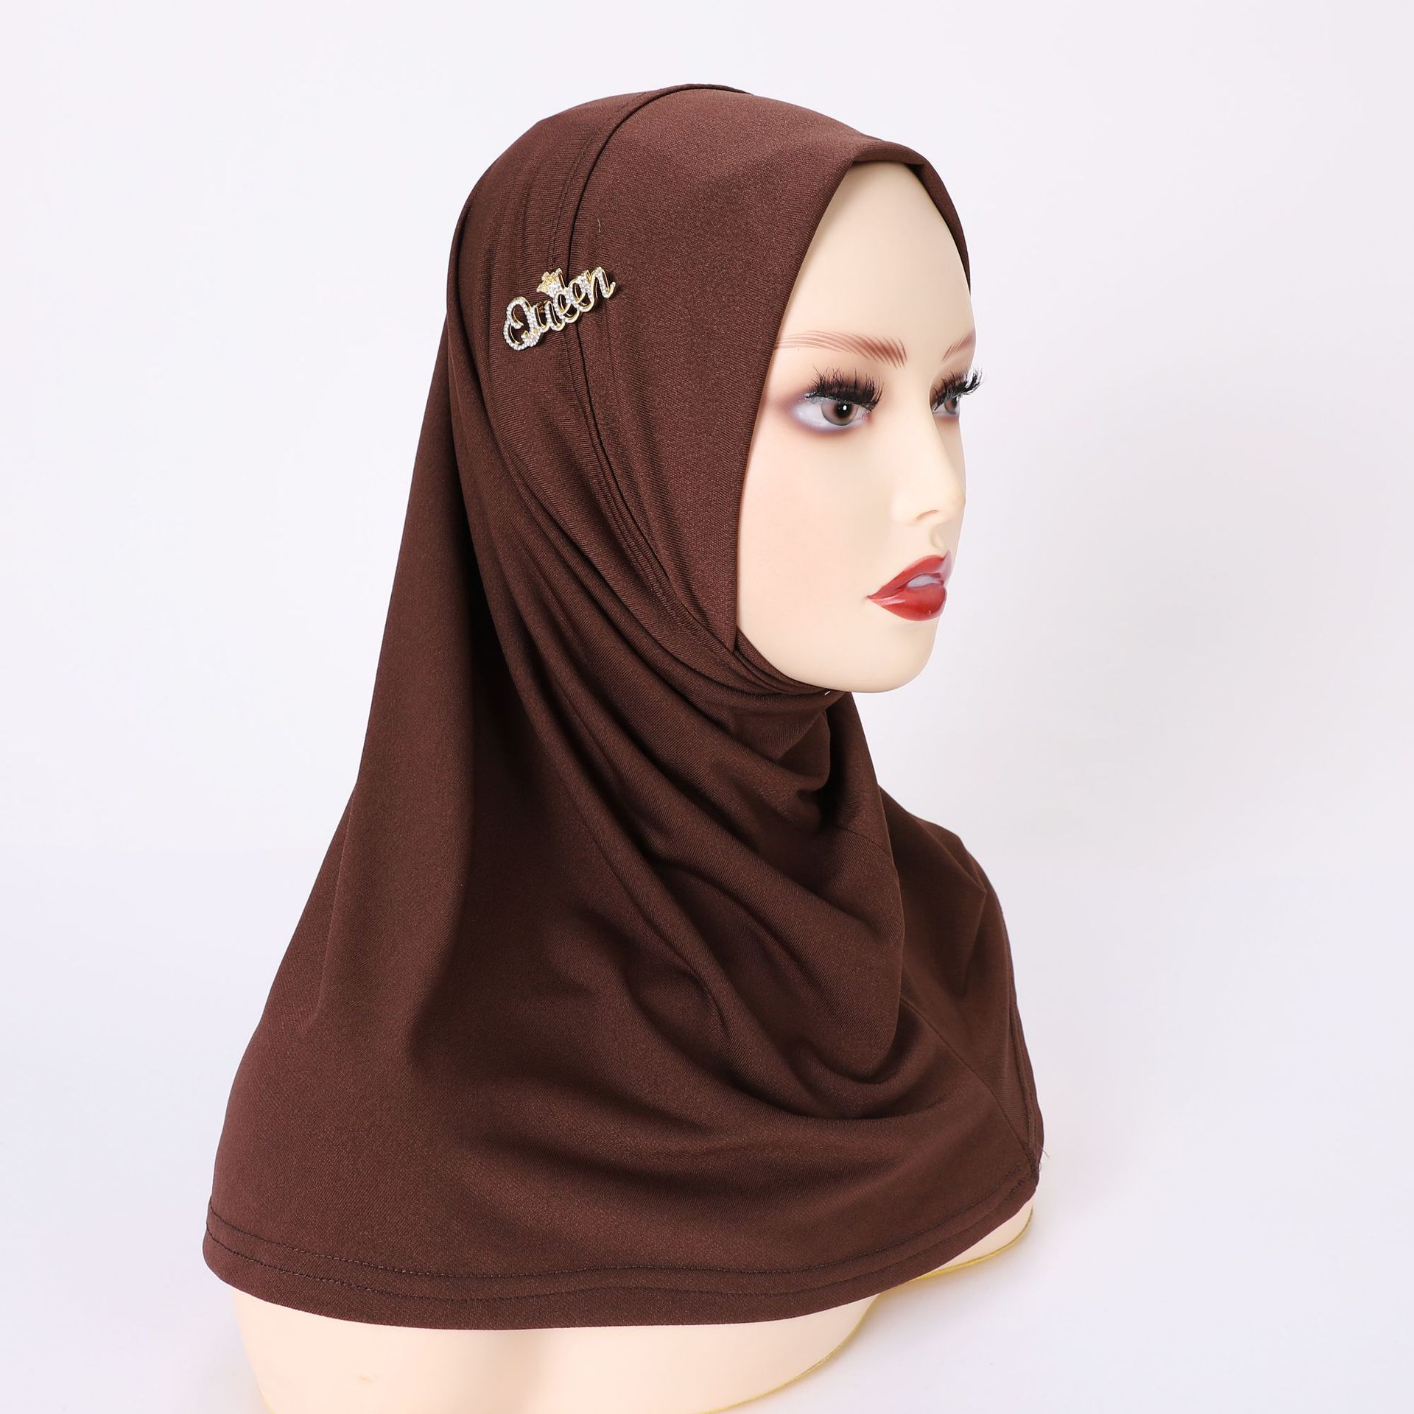 Muslim female headgear hat CRRshop free shipping hot sale women new fashion trend Exquisite White Headcover Style Crystal Linen Muslim Scarf Letter Alloy Ornament Headband Muslim Small Hat Scarf Headband